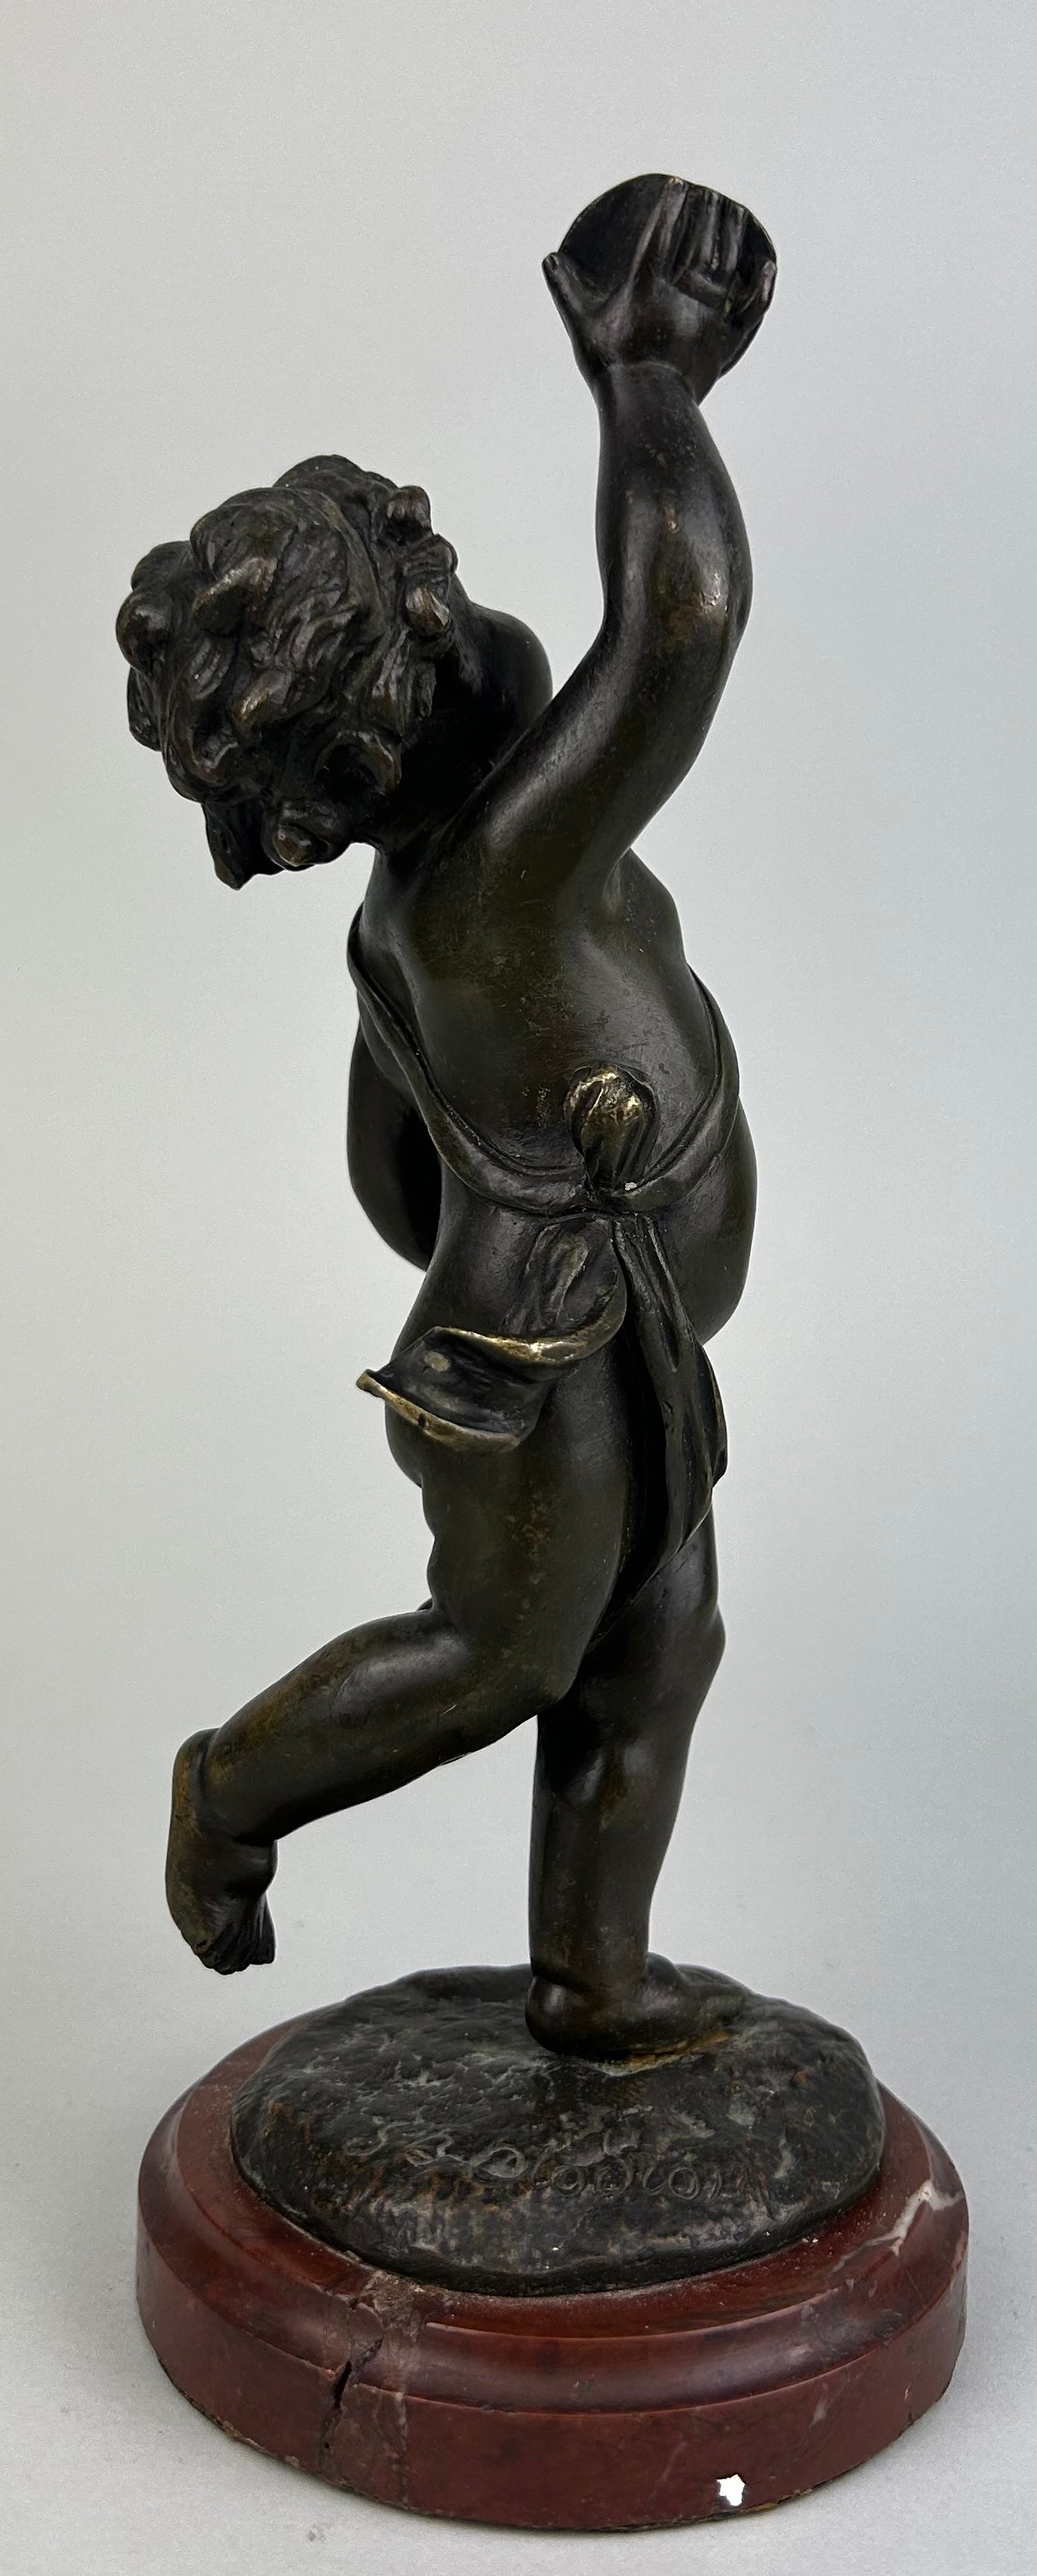 A 19TH CENTURY FRENCH BRONZE SCULPTURE OF A PUTTI AFTER CLAUDE CLODION (1738-1814) ON A RED MARBLE - Image 4 of 5